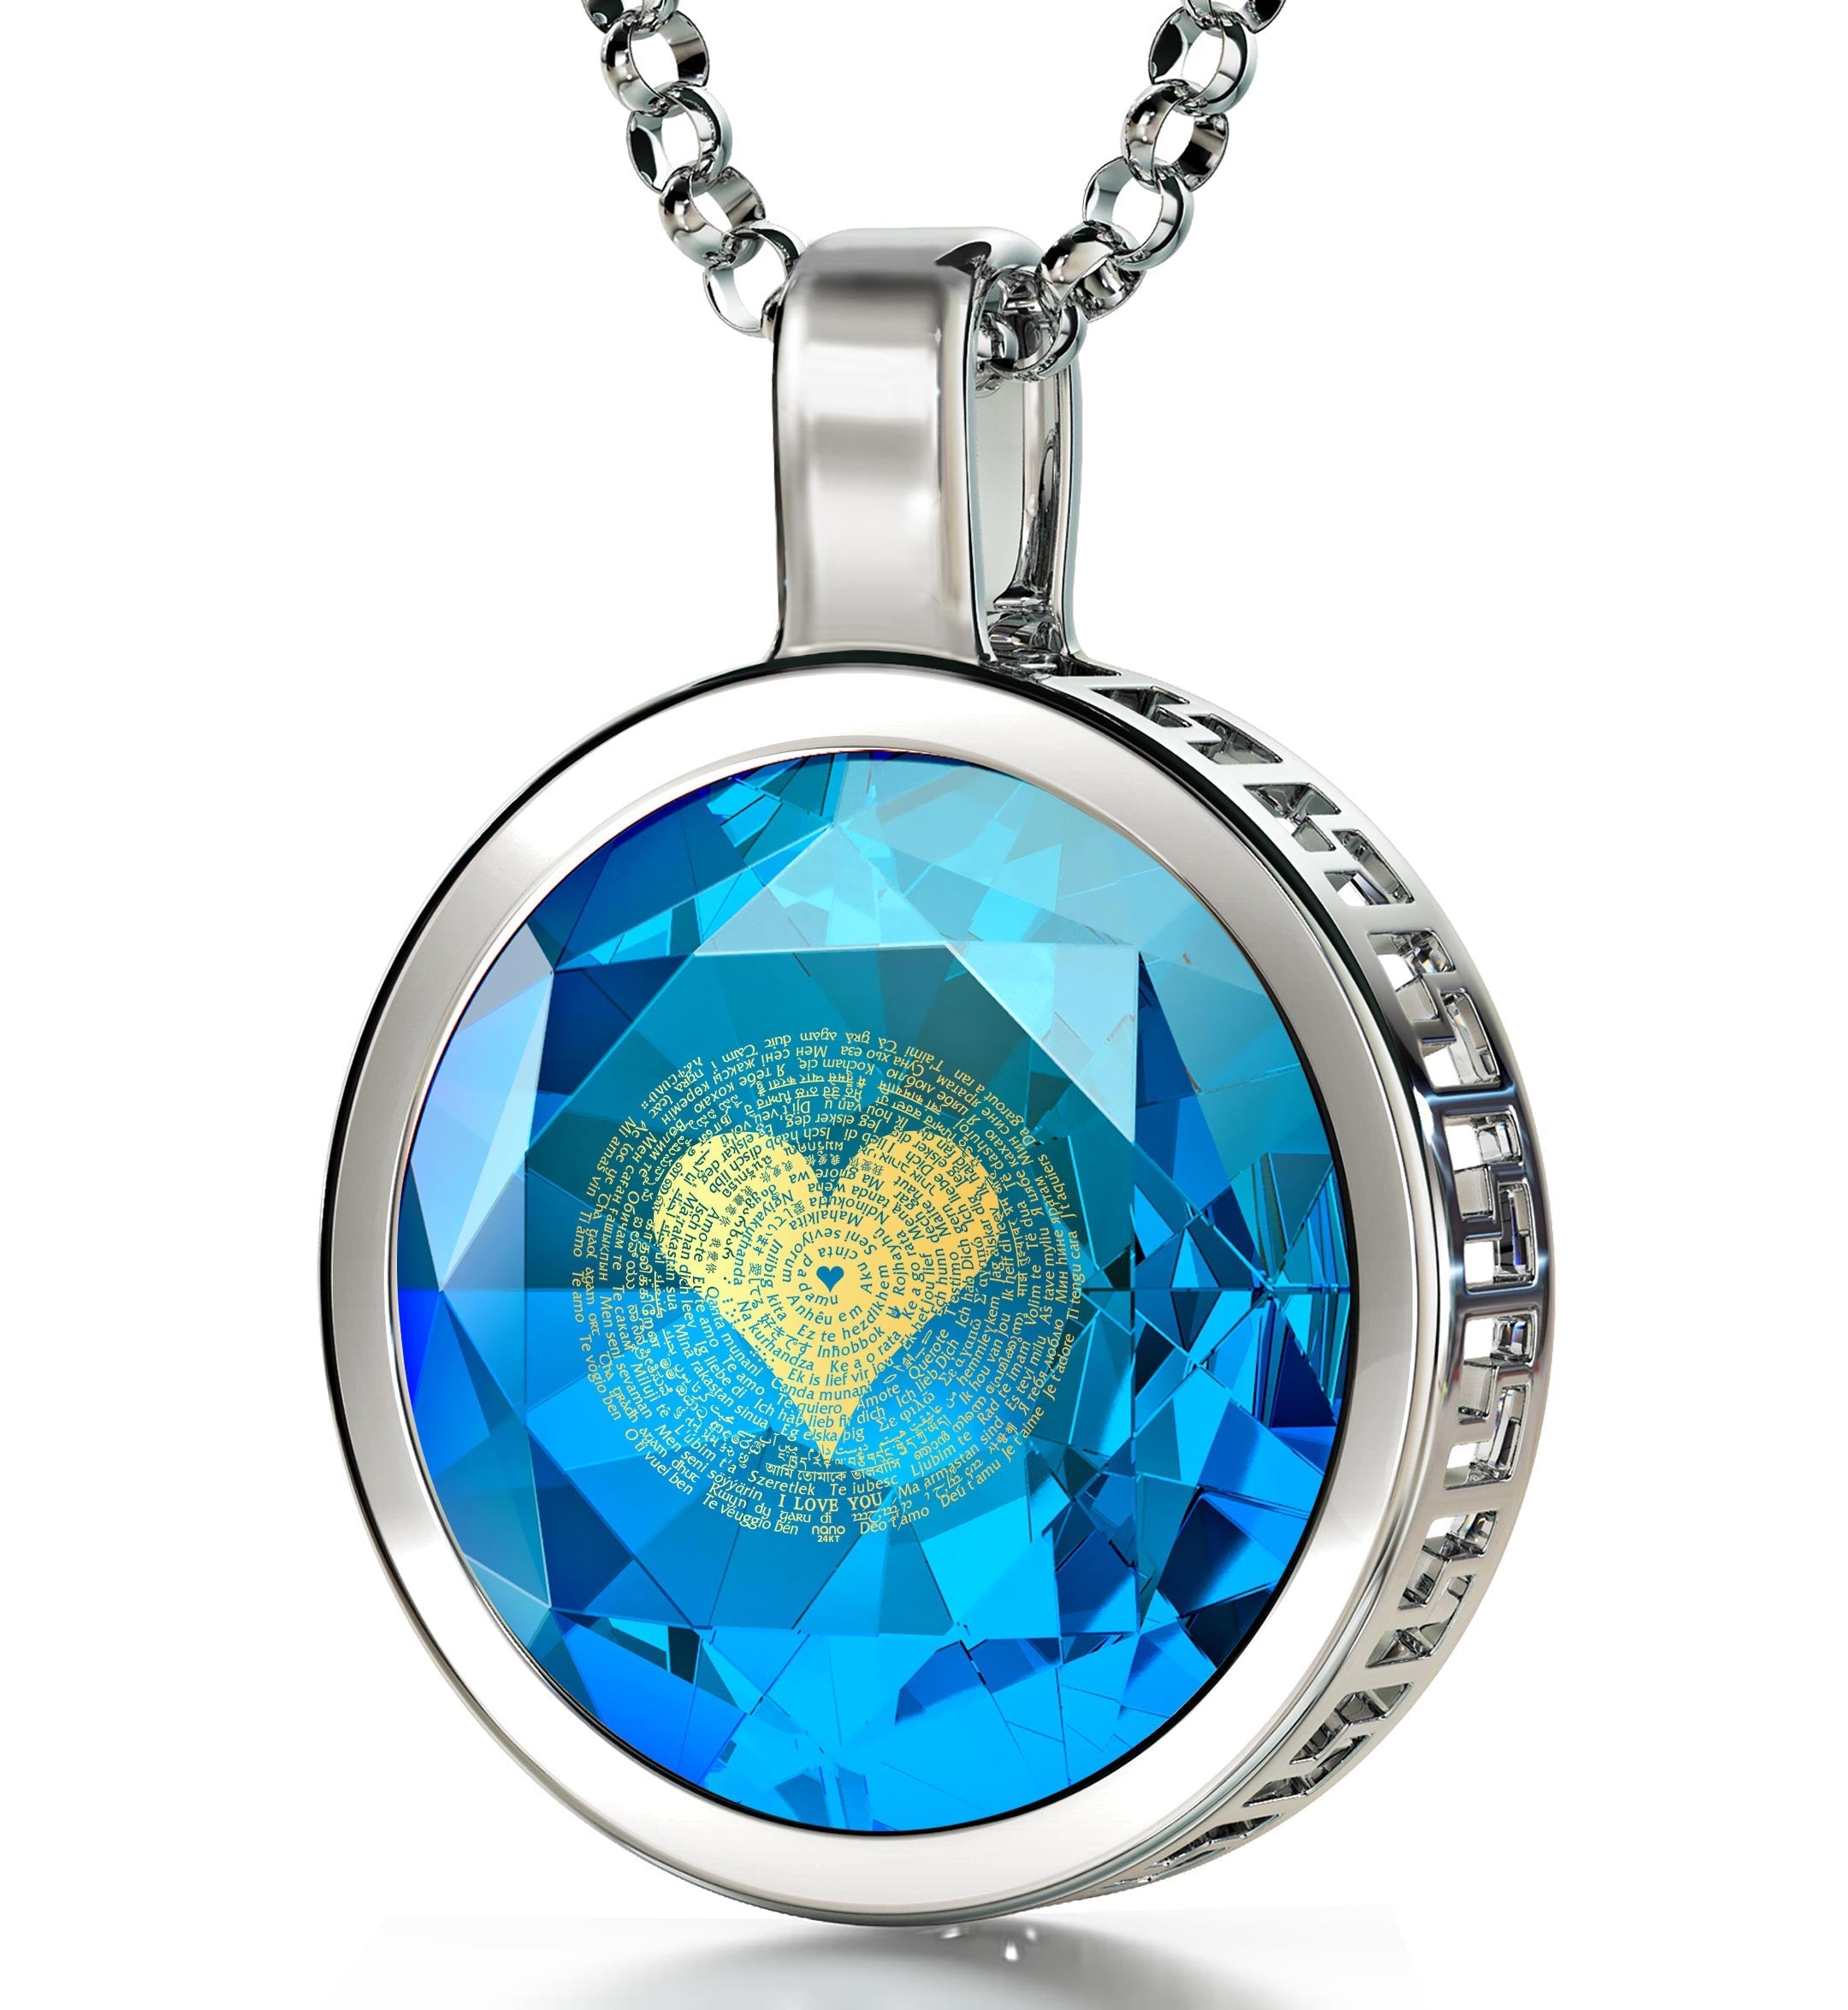 Close-up of a pin with a multifaceted 925 Sterling Silver I Love You Necklace 24k Gold Inscribed 120 Languages pendant design featuring a central heart made of word art within a circular frame.